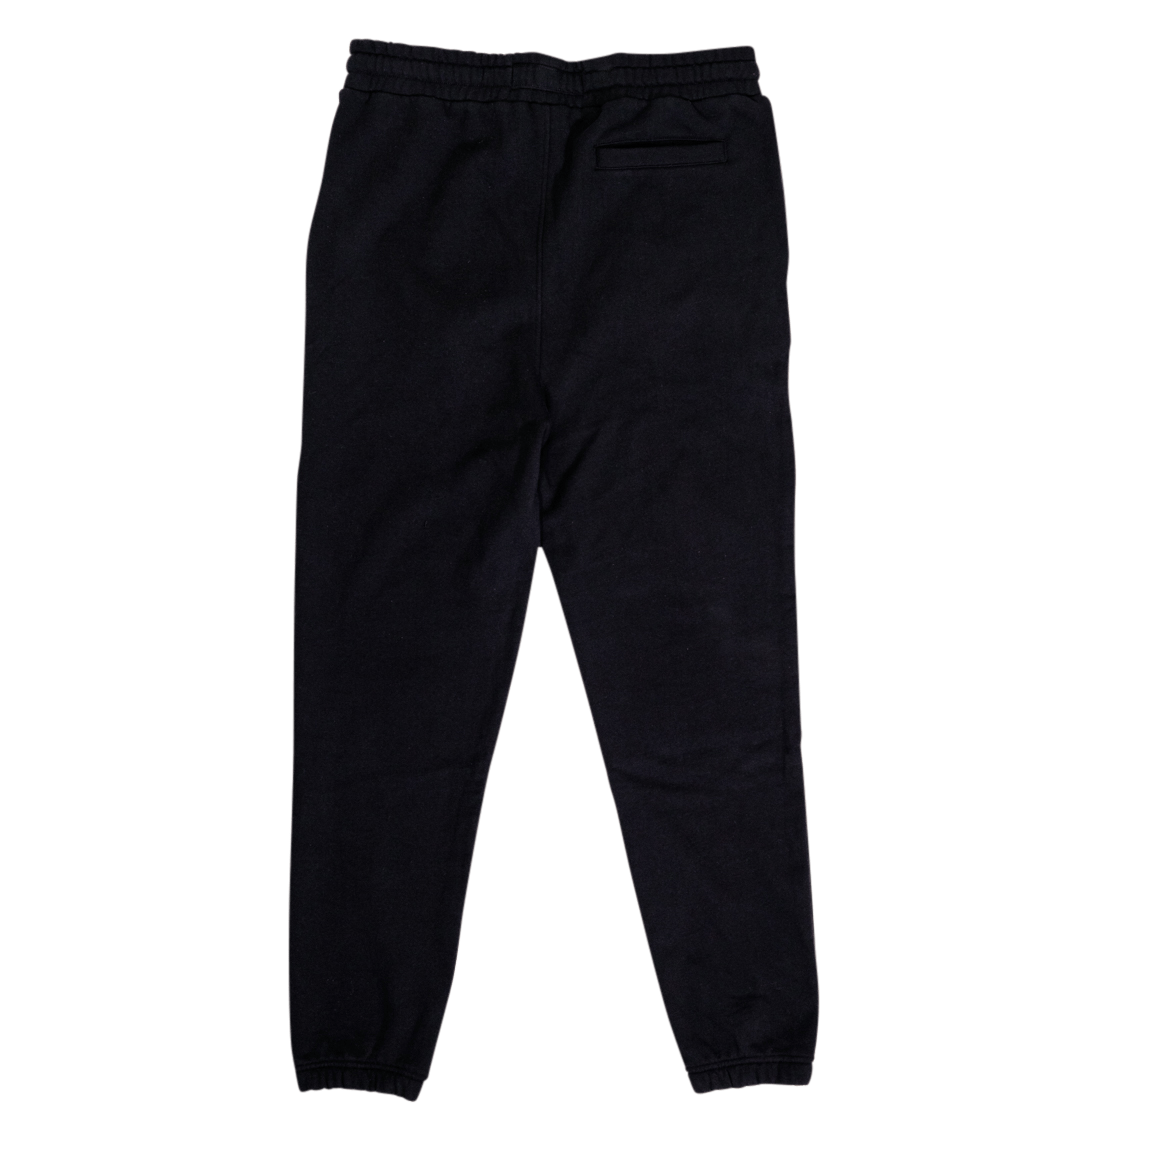 VB Support Trackies – Victor Bravo's